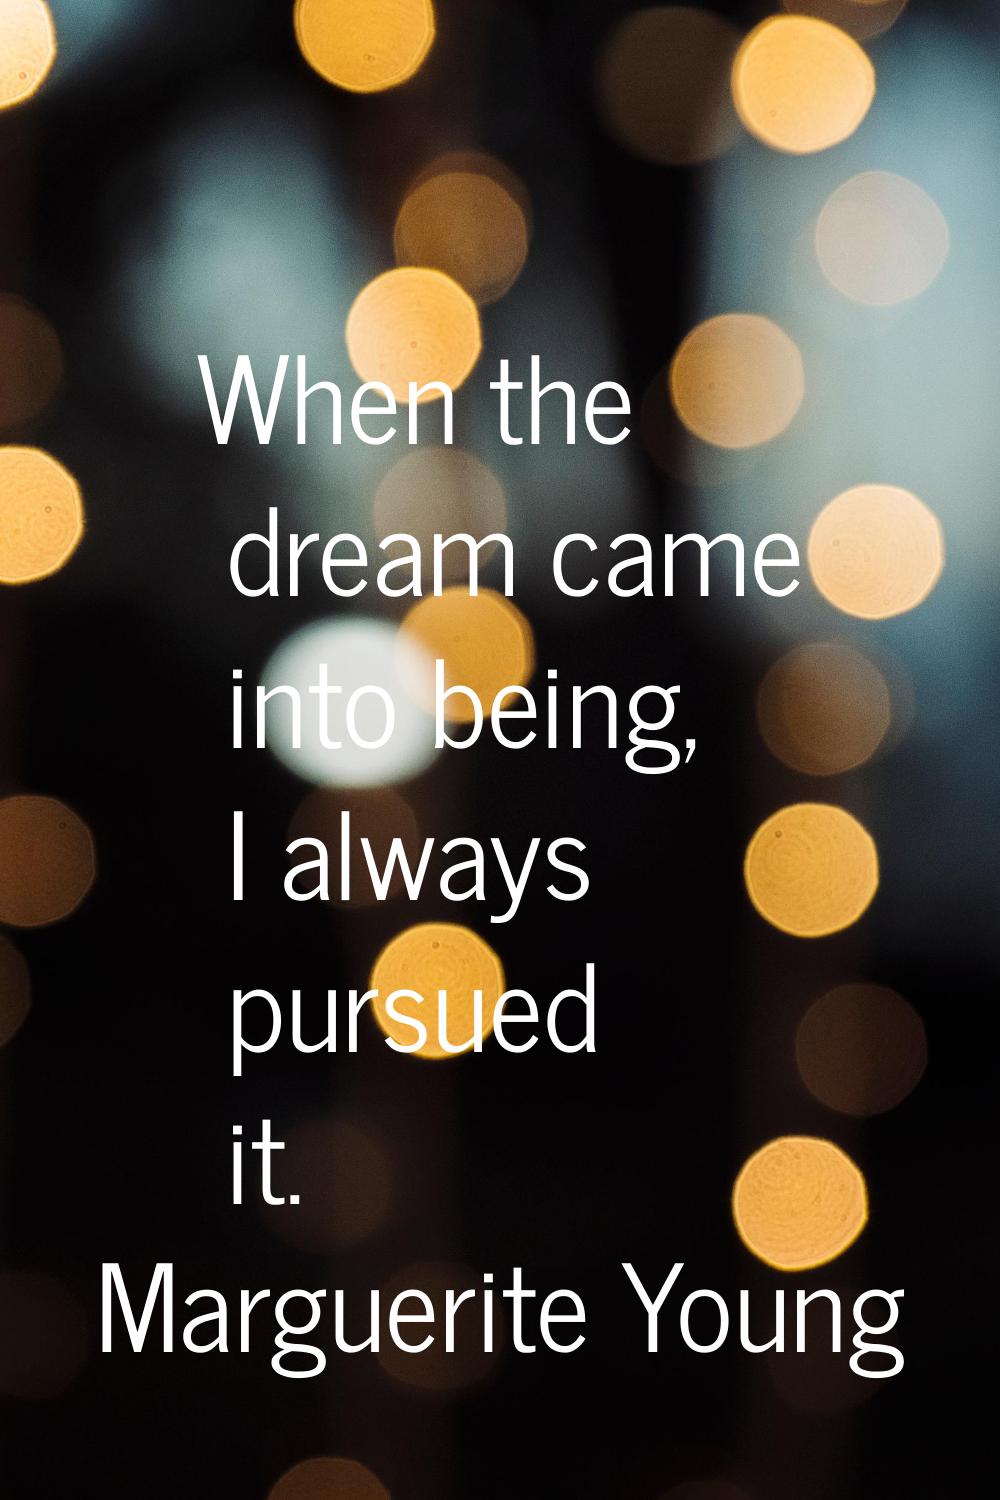 When the dream came into being, I always pursued it.